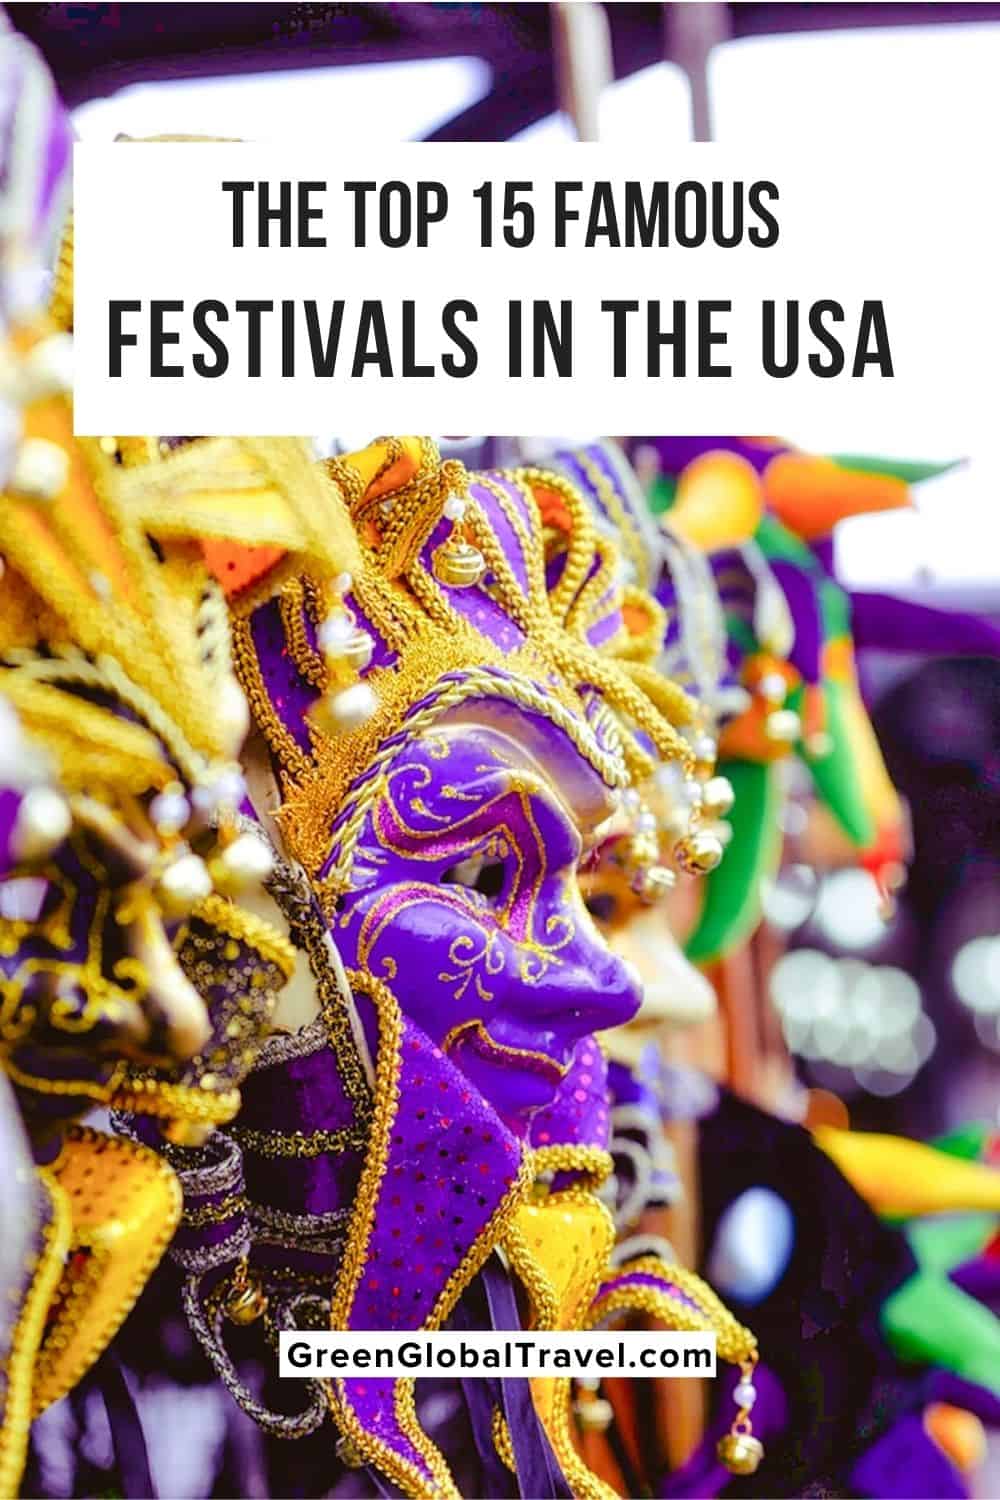 The Top 15 Famous Festivals in the USA, from holiday celebrations like Mardi Gras and St. Patrick's Day in Savannah to Bonnaroo, Burning Man and more.